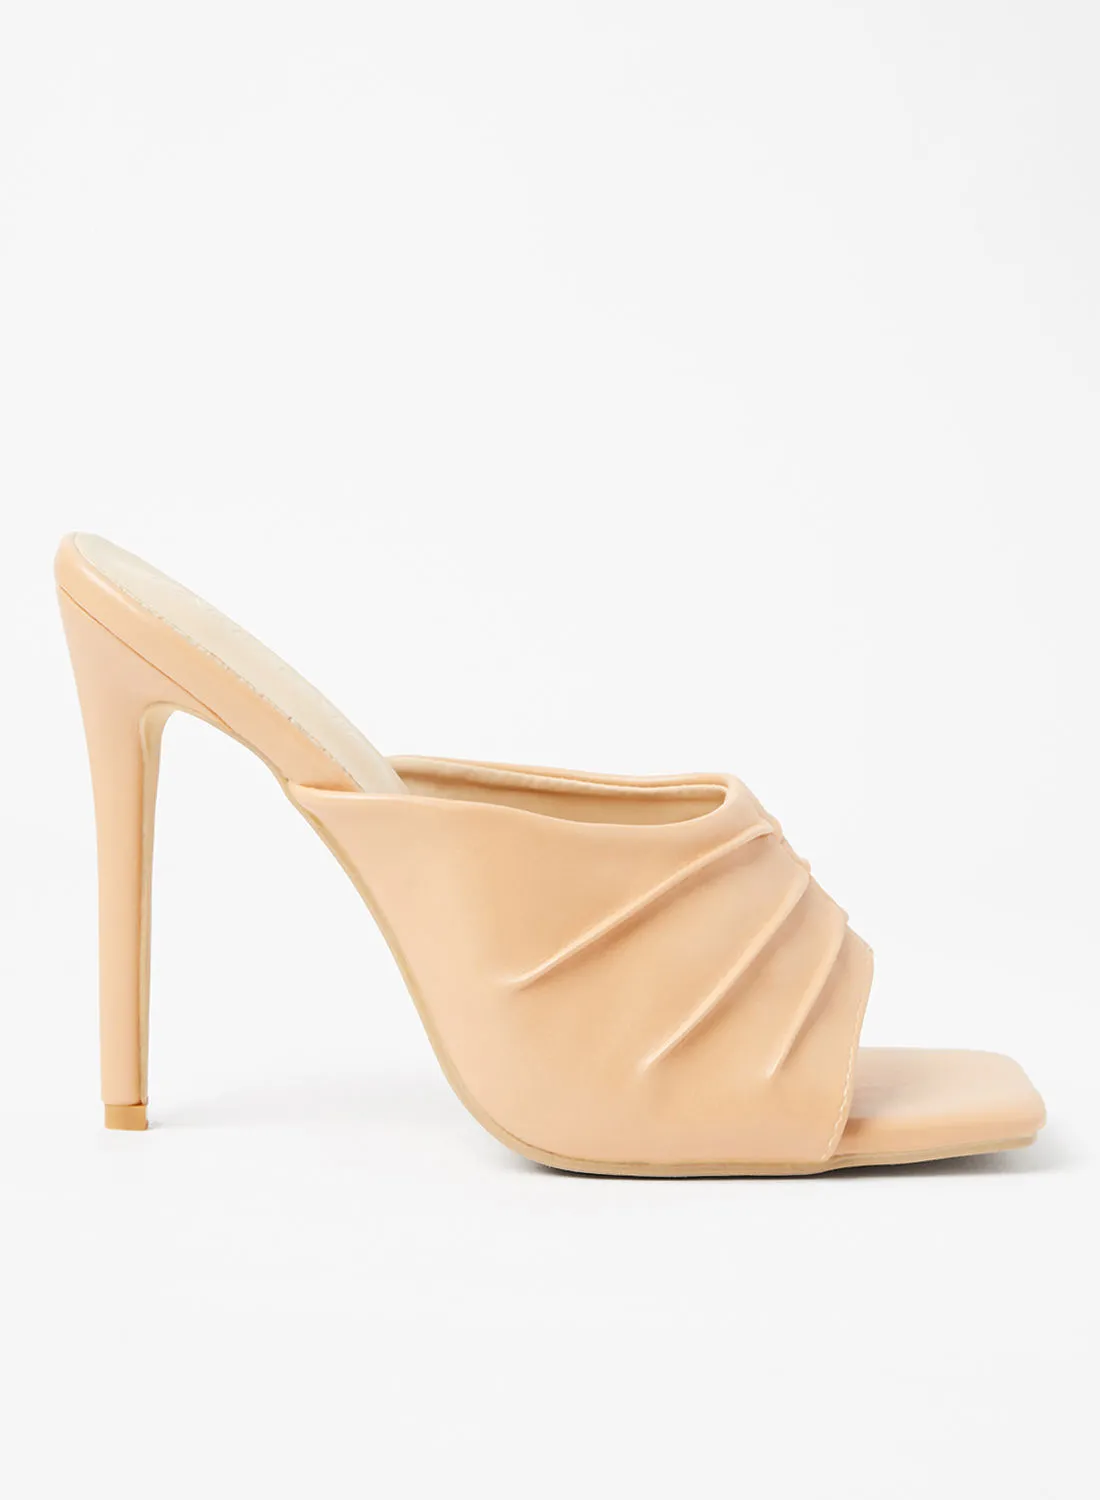 LABEL RAIL Faux Leather High Heel Mules Nude